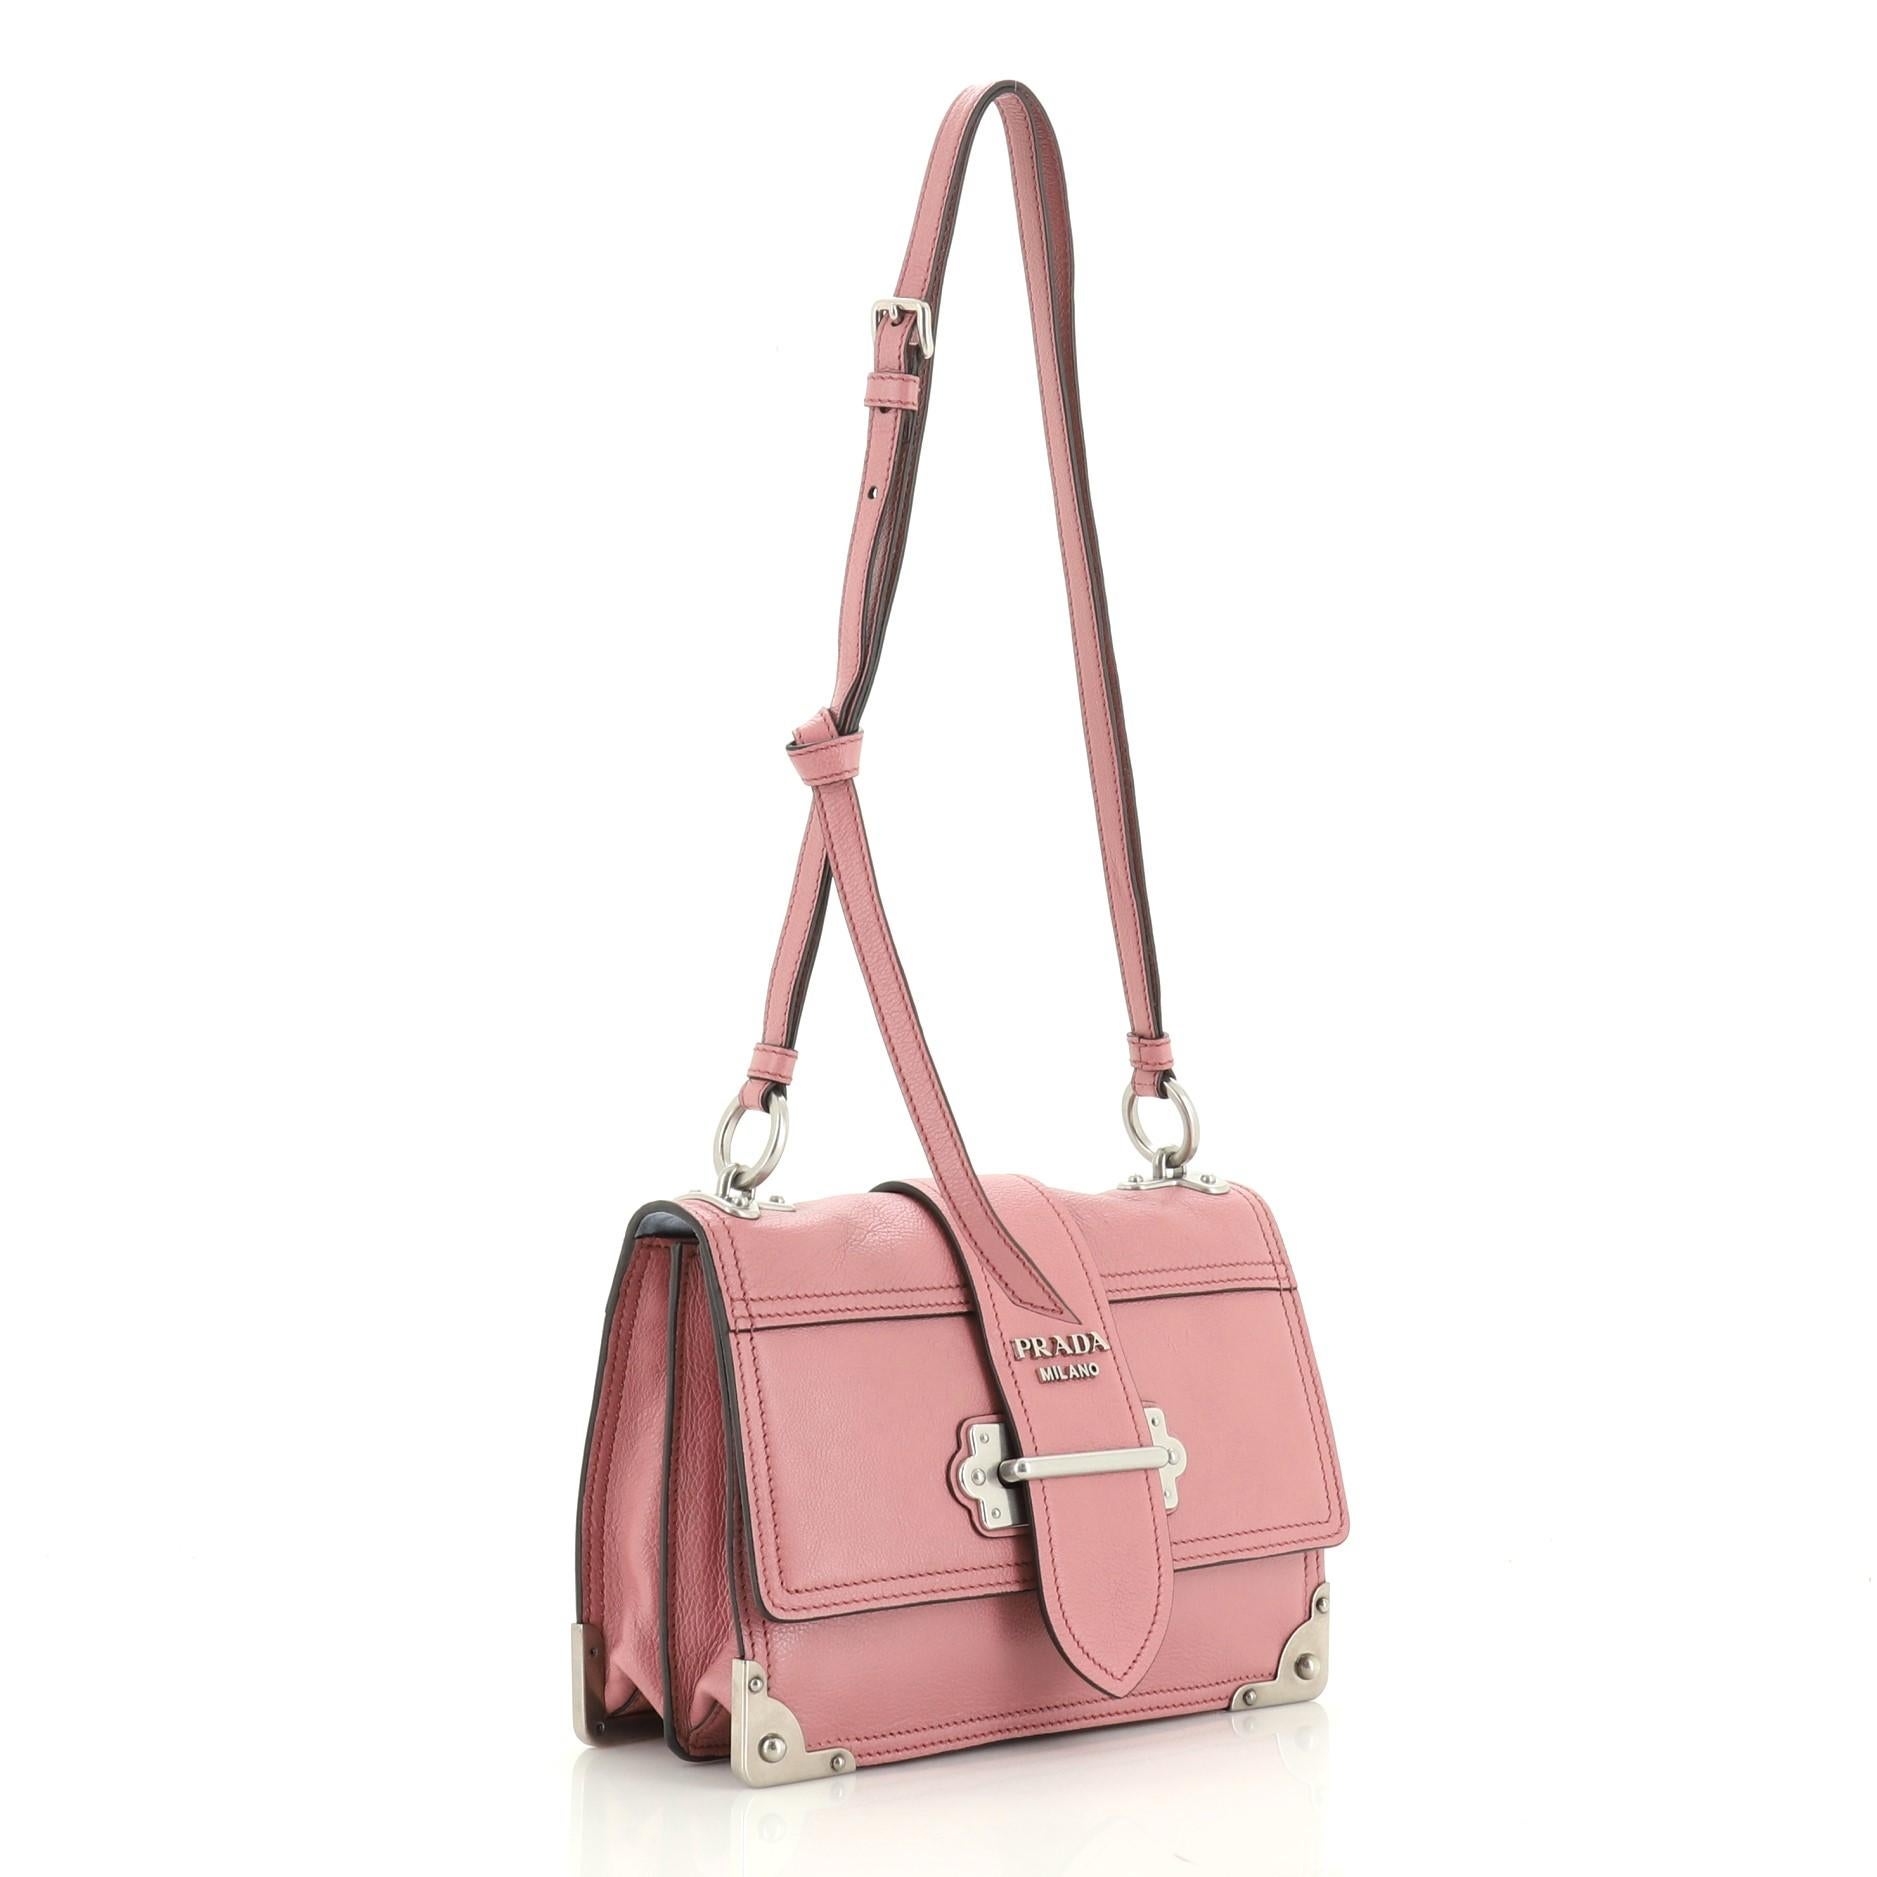 This Prada Cahier Convertible Shoulder Bag City Calf Medium, crafted from pink calf leather, features a flat leather strap, metal hardware trim, and aged silver-tone hardware. Its buckle closure opens to a blue suede interior with side zip and slip